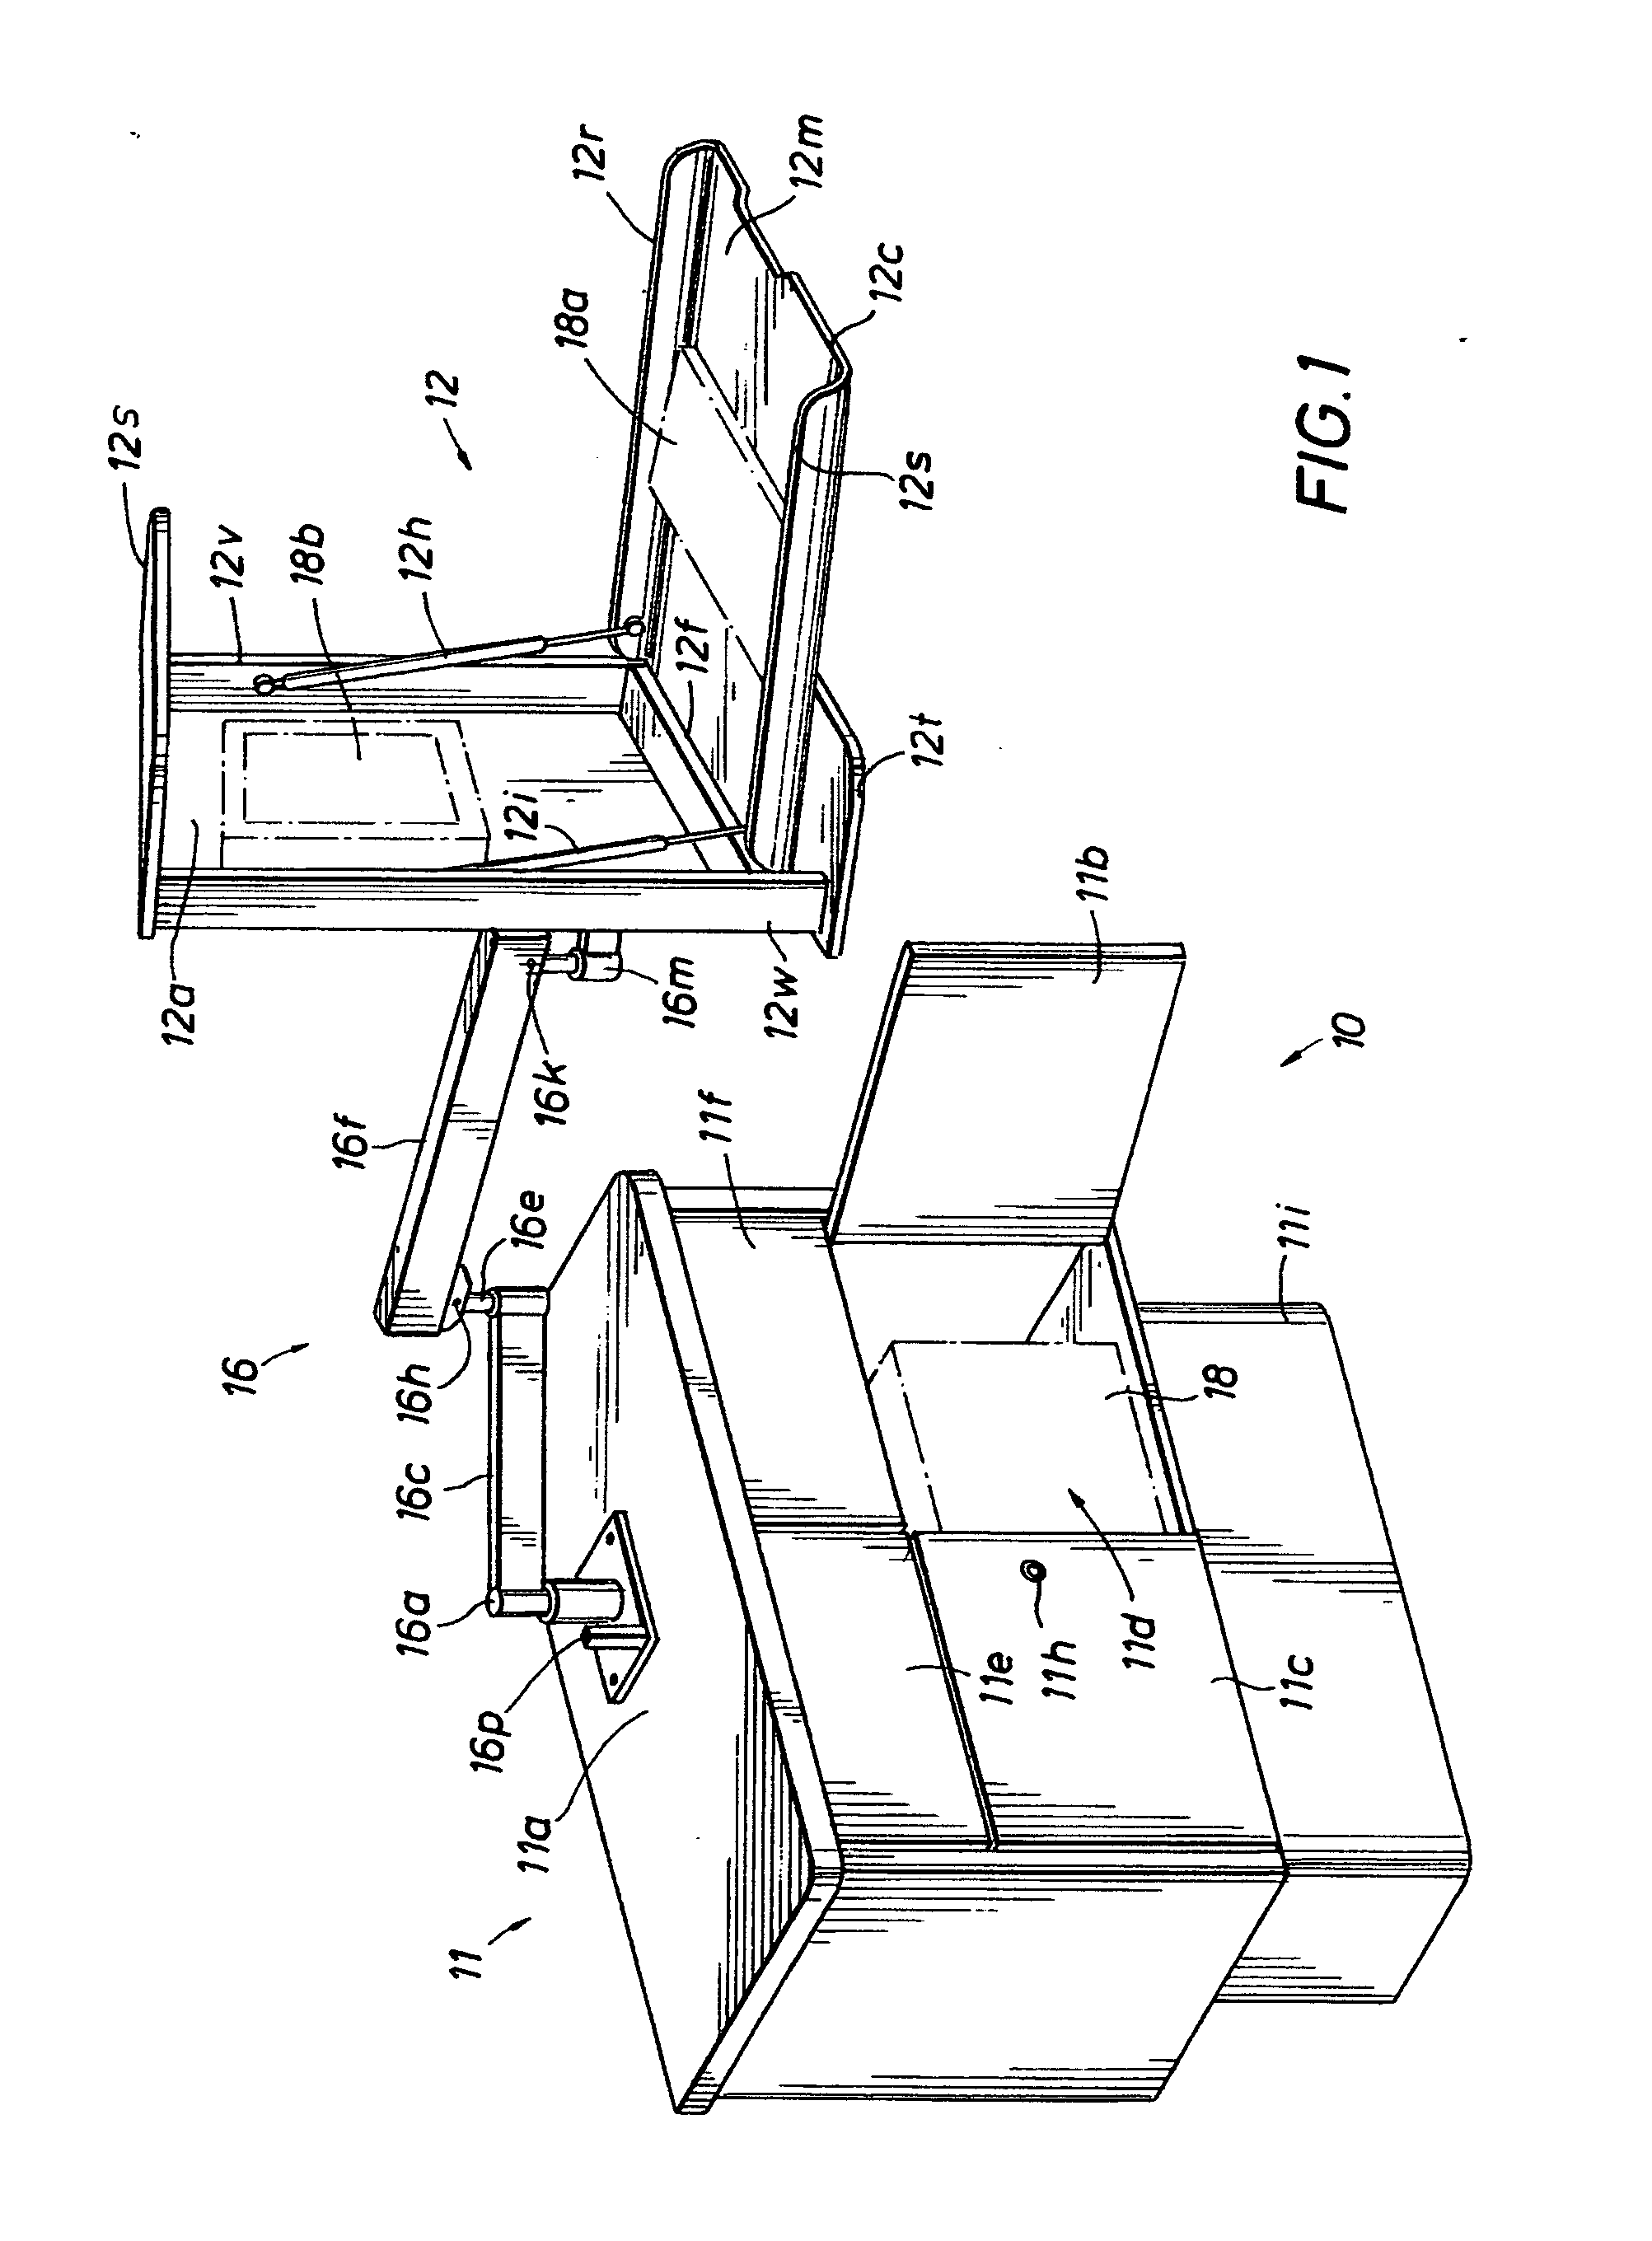 Retractable multiposition furniture system